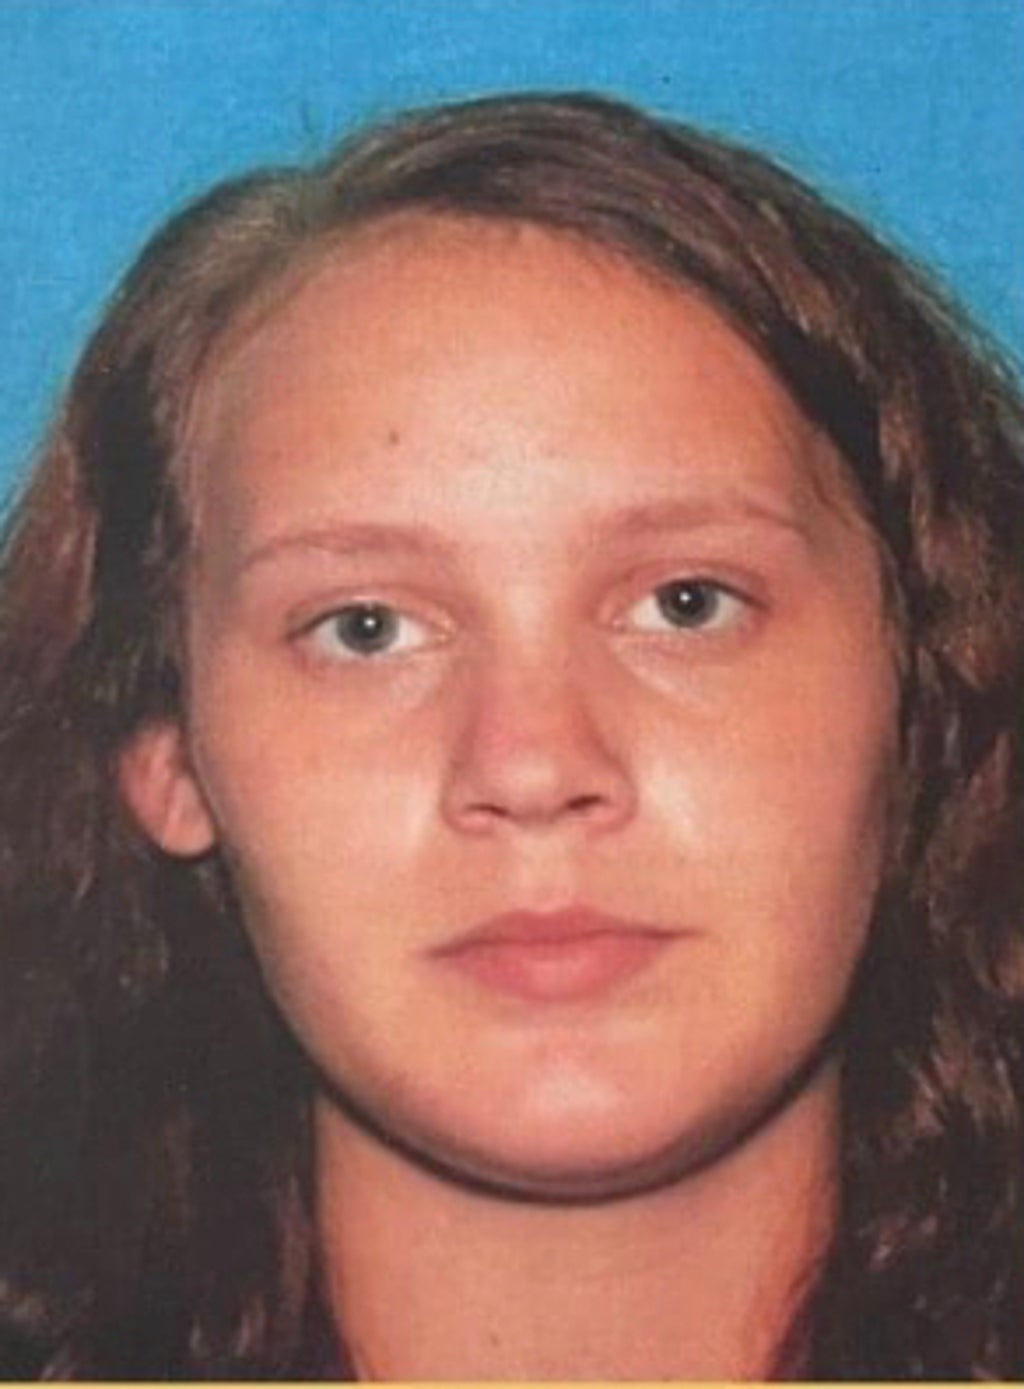 Mississippi woman, 20, charged with capital murder for allegedly throwing baby onto road